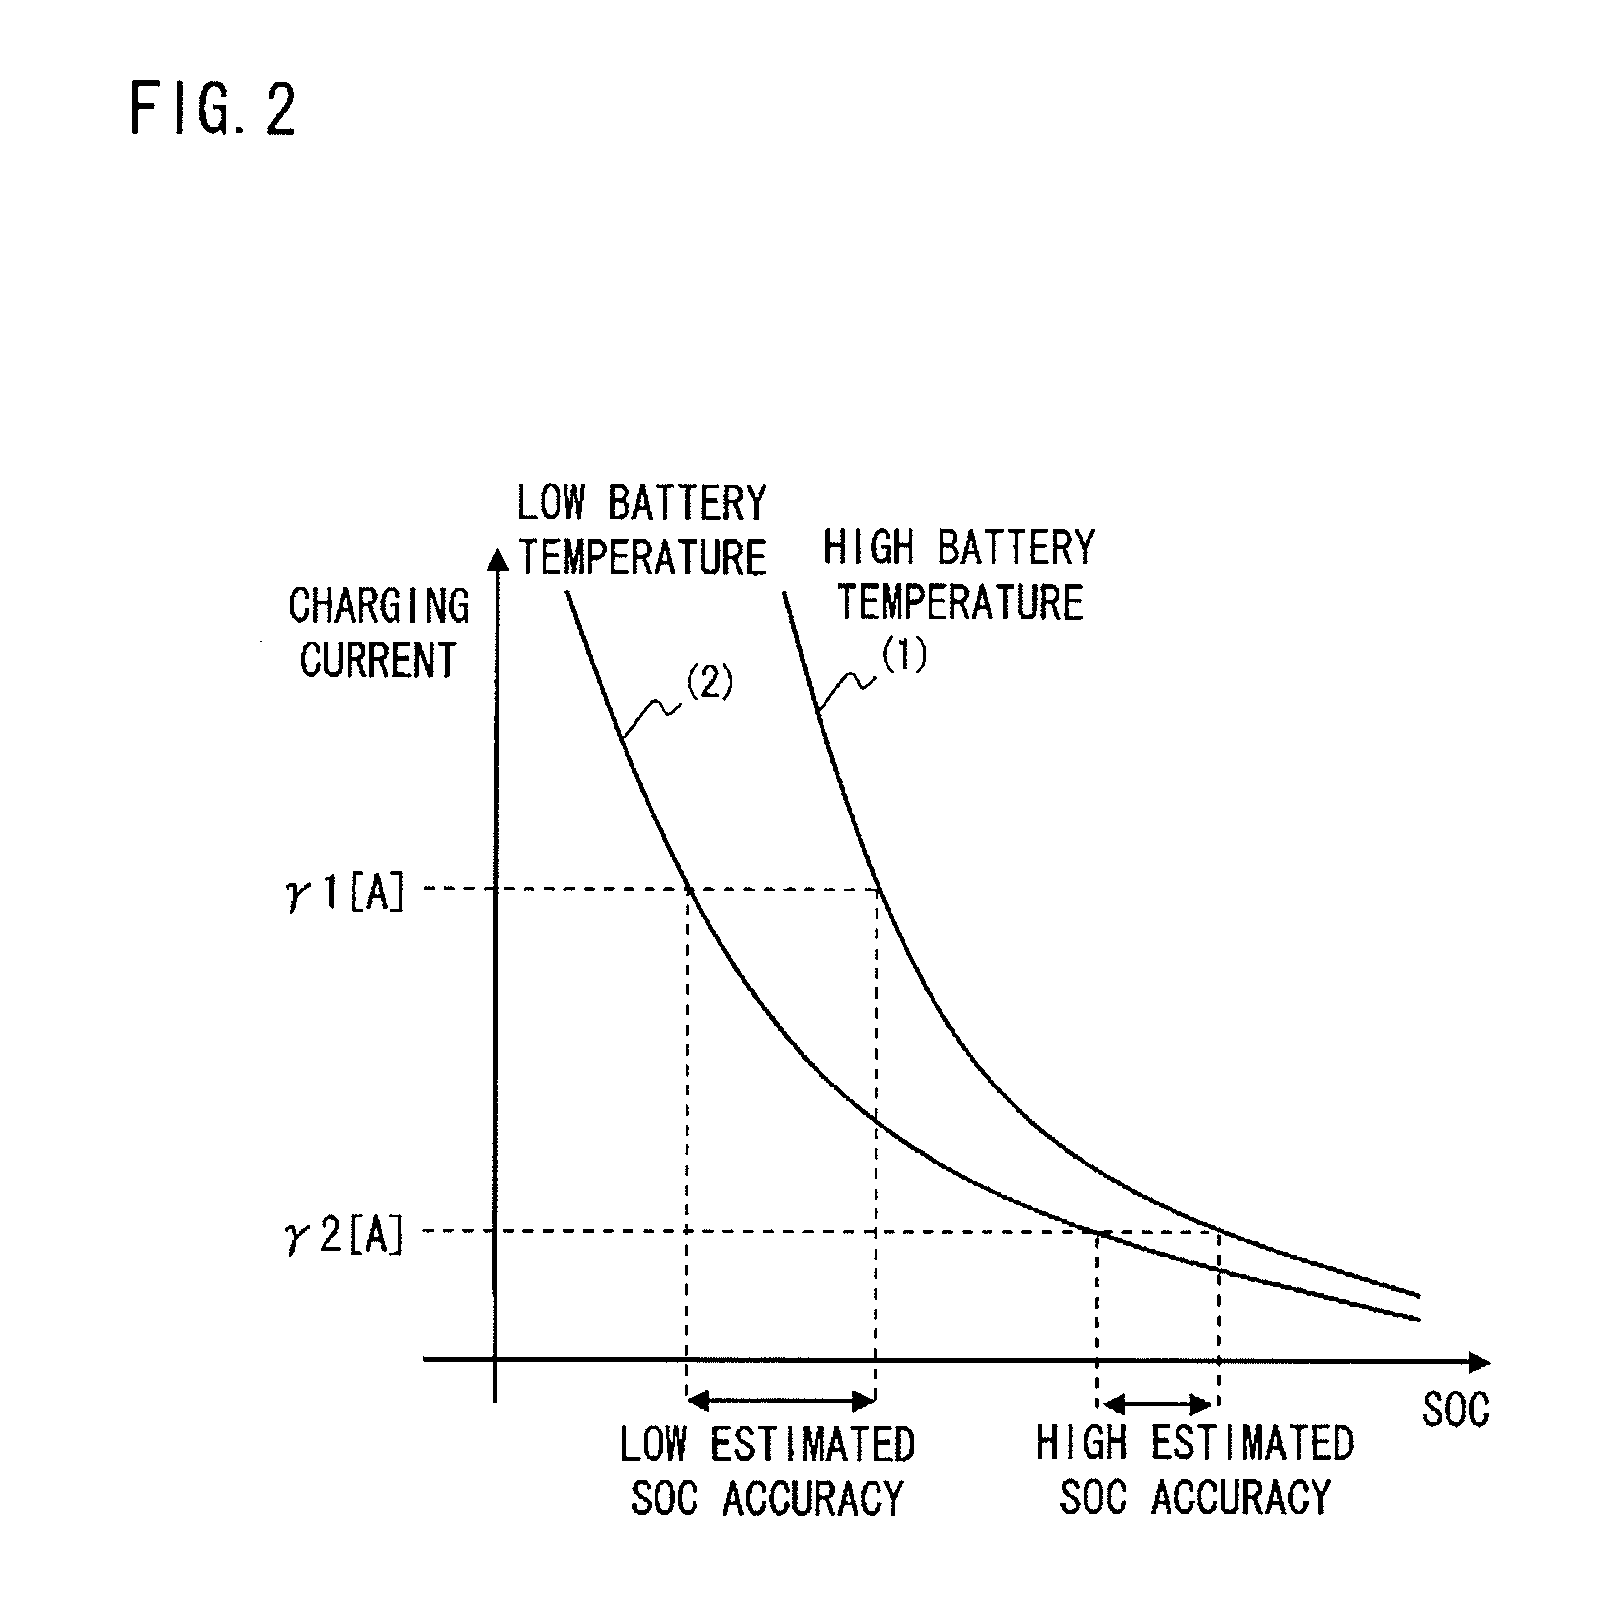 Full charge control apparatus for onboard battery